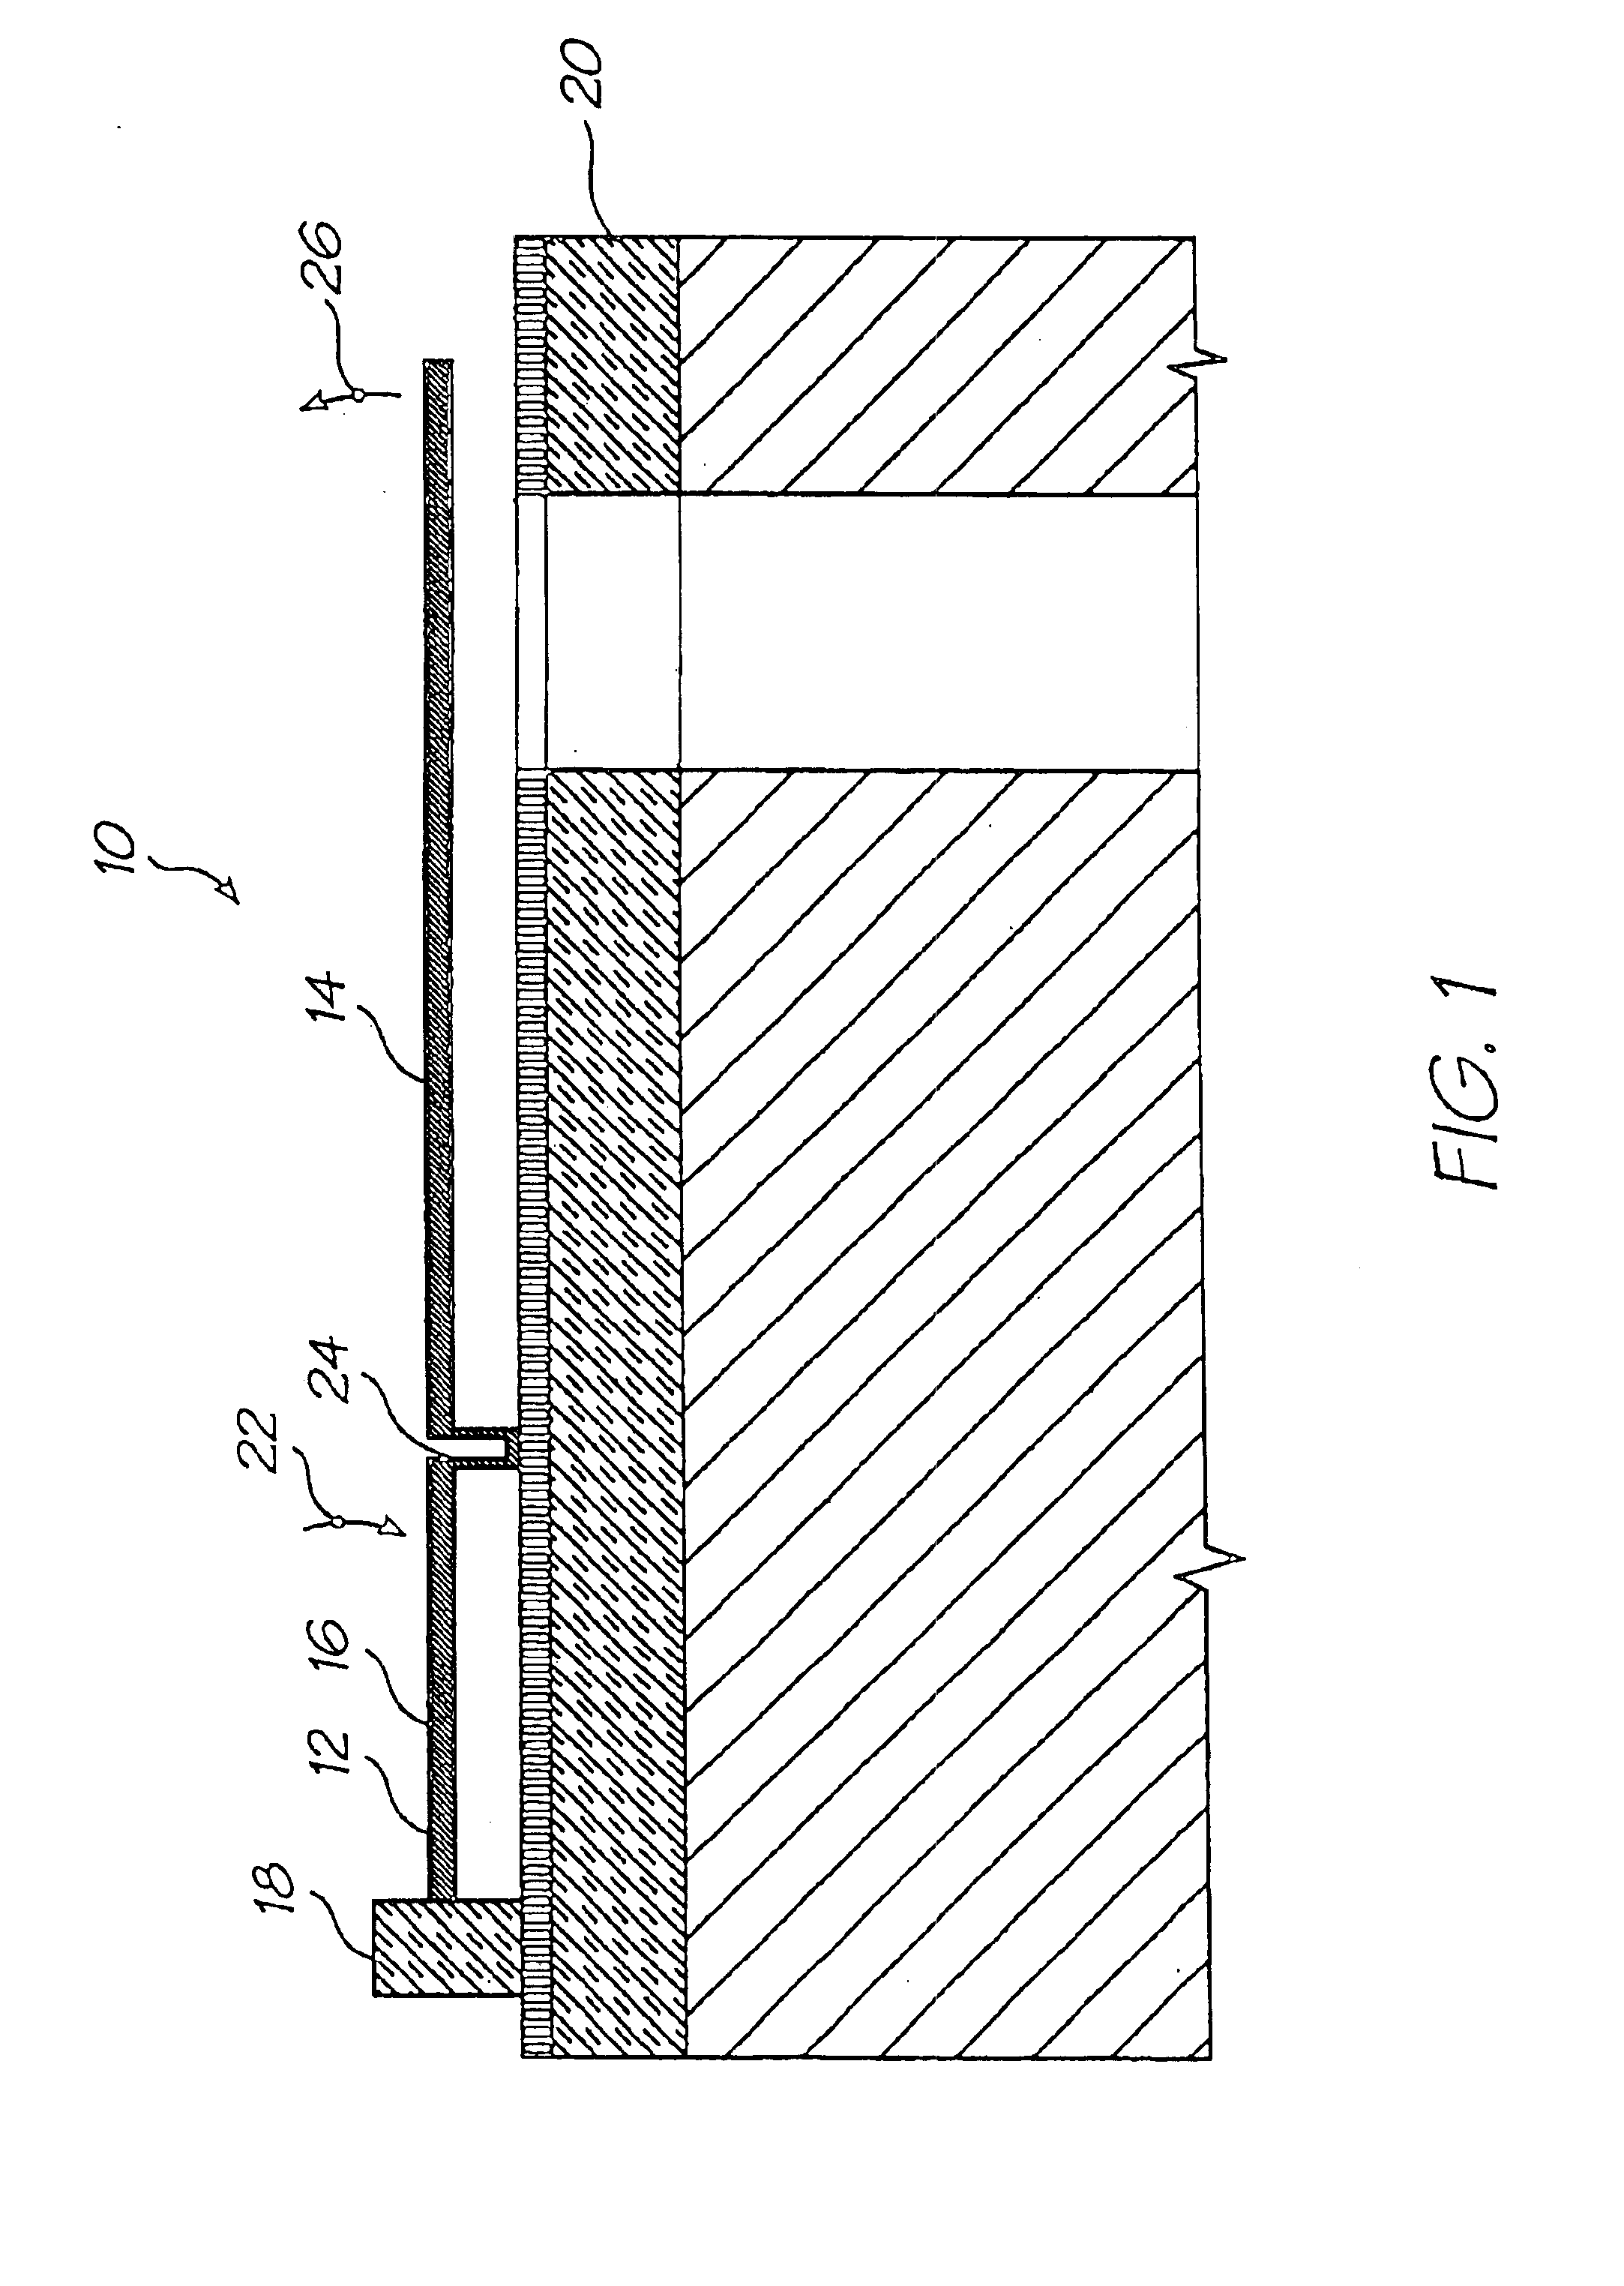 Micro-electromechanical liquid ejection device